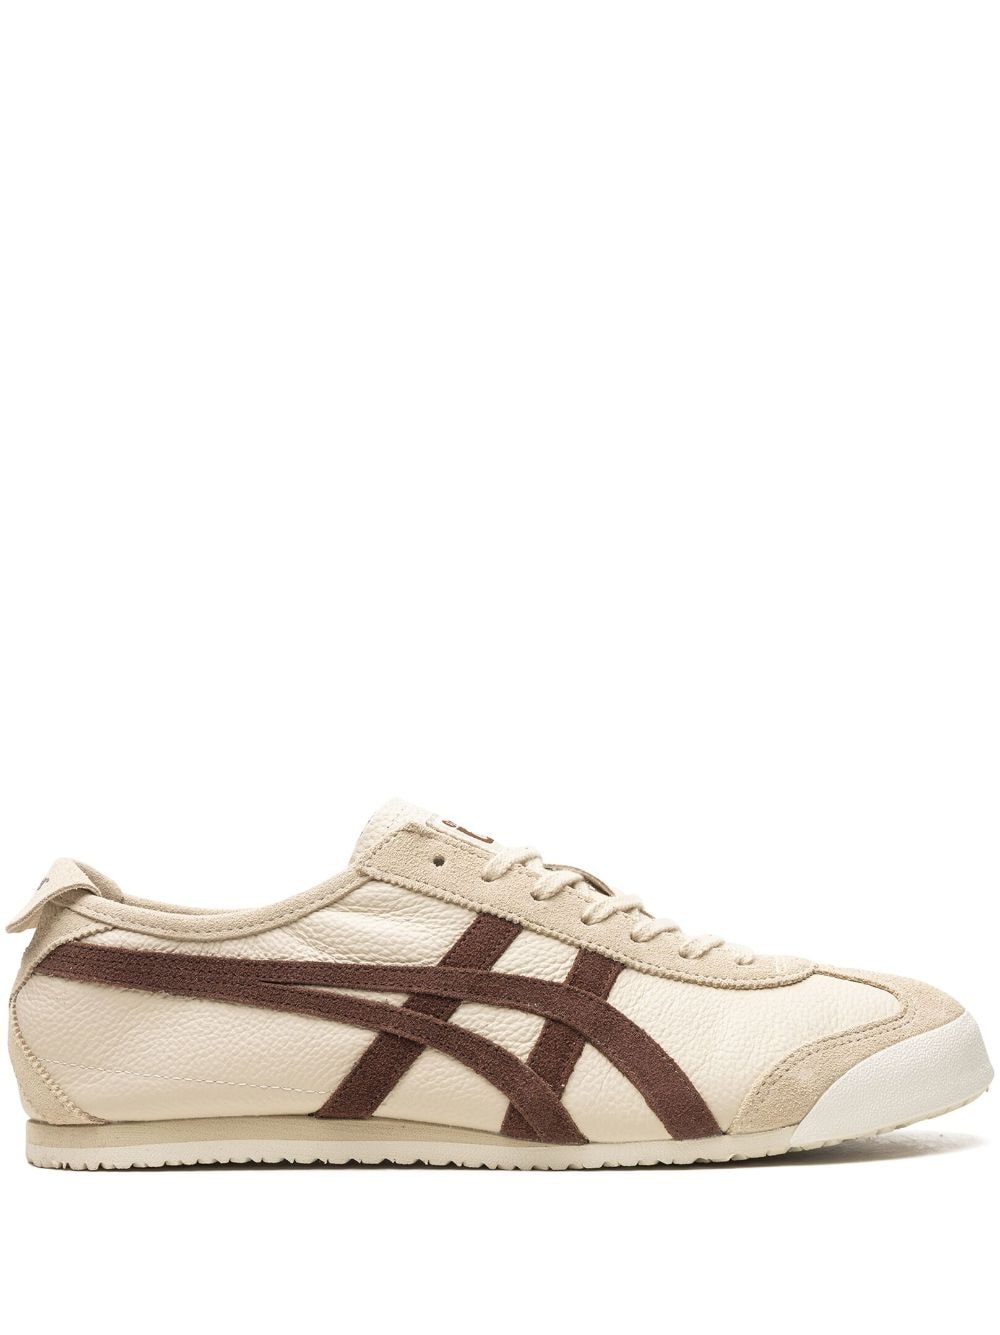 Image 1 of Onitsuka Tiger Mexico 66 Vintage "Beige/Brown" sneakers